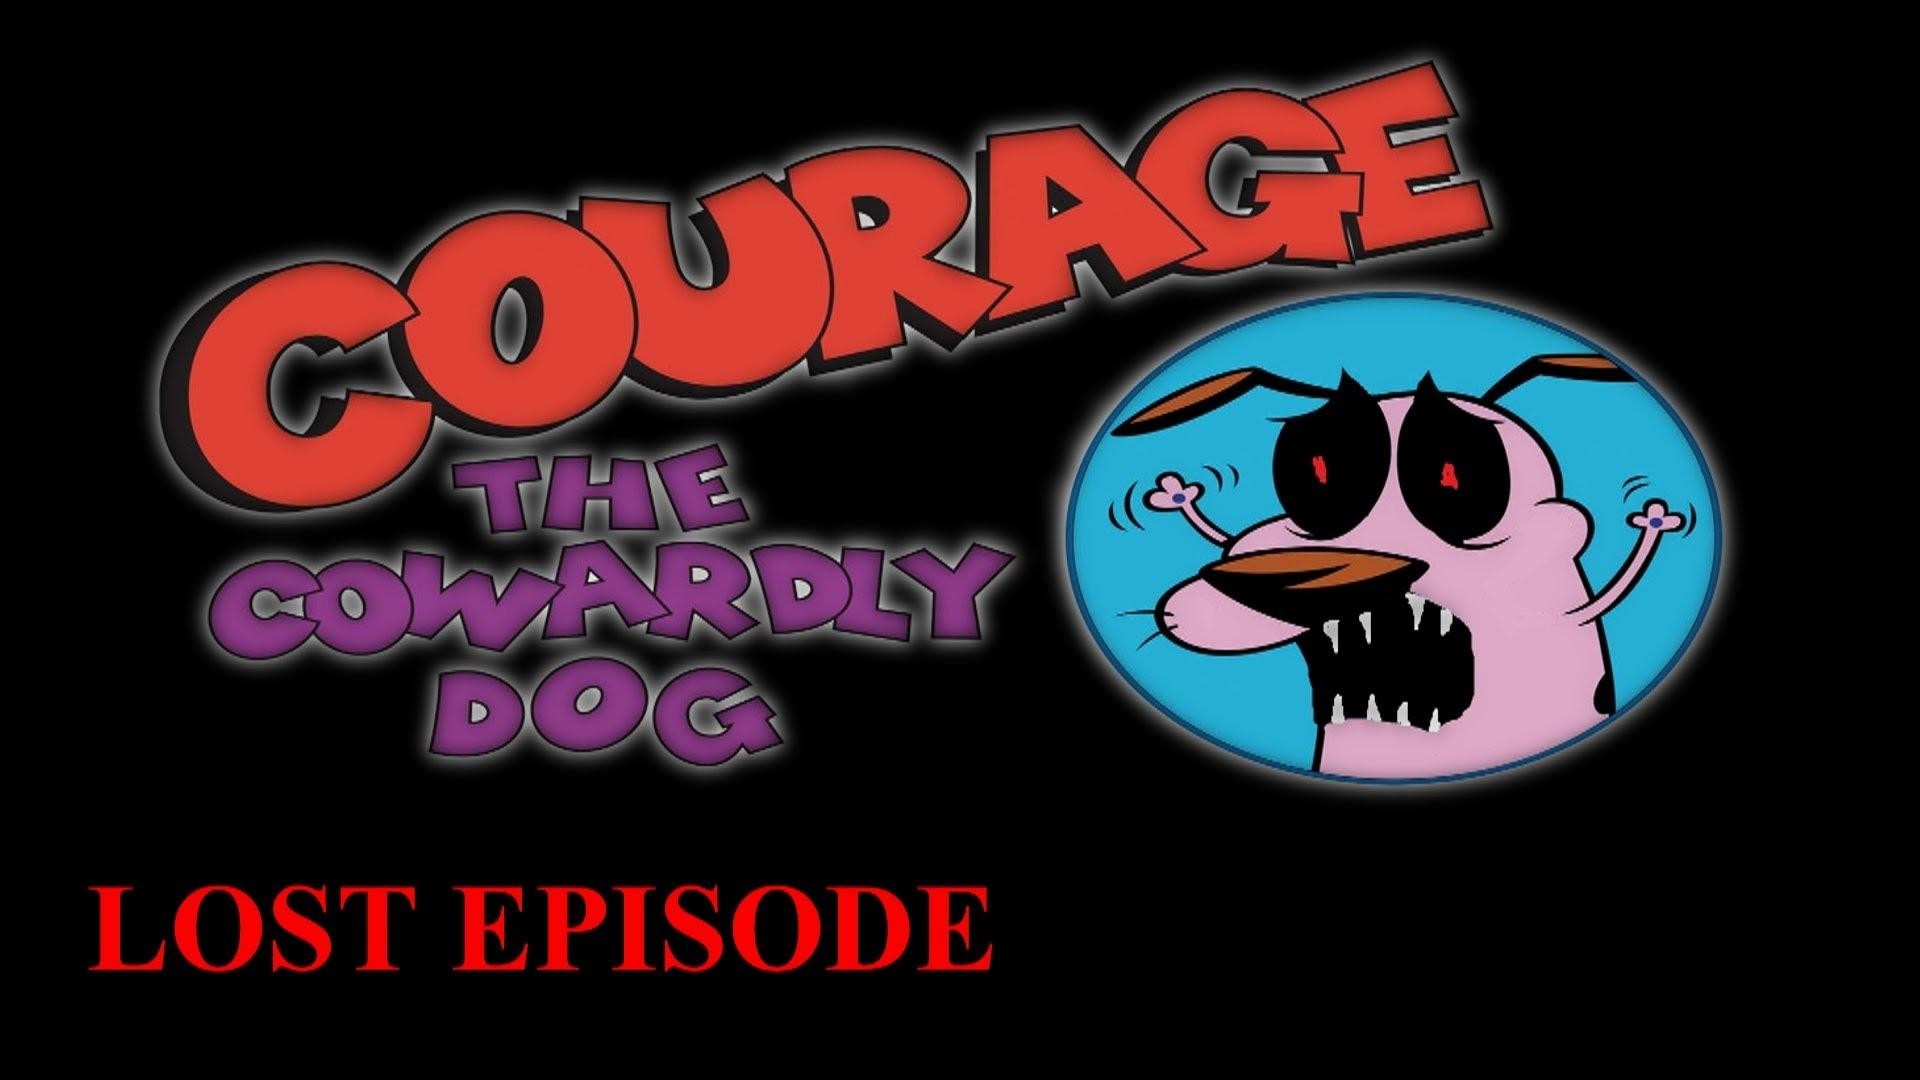 1920x1080 wallpaper.wiki-Image-of-Courage-The-Cowardly-Dog-